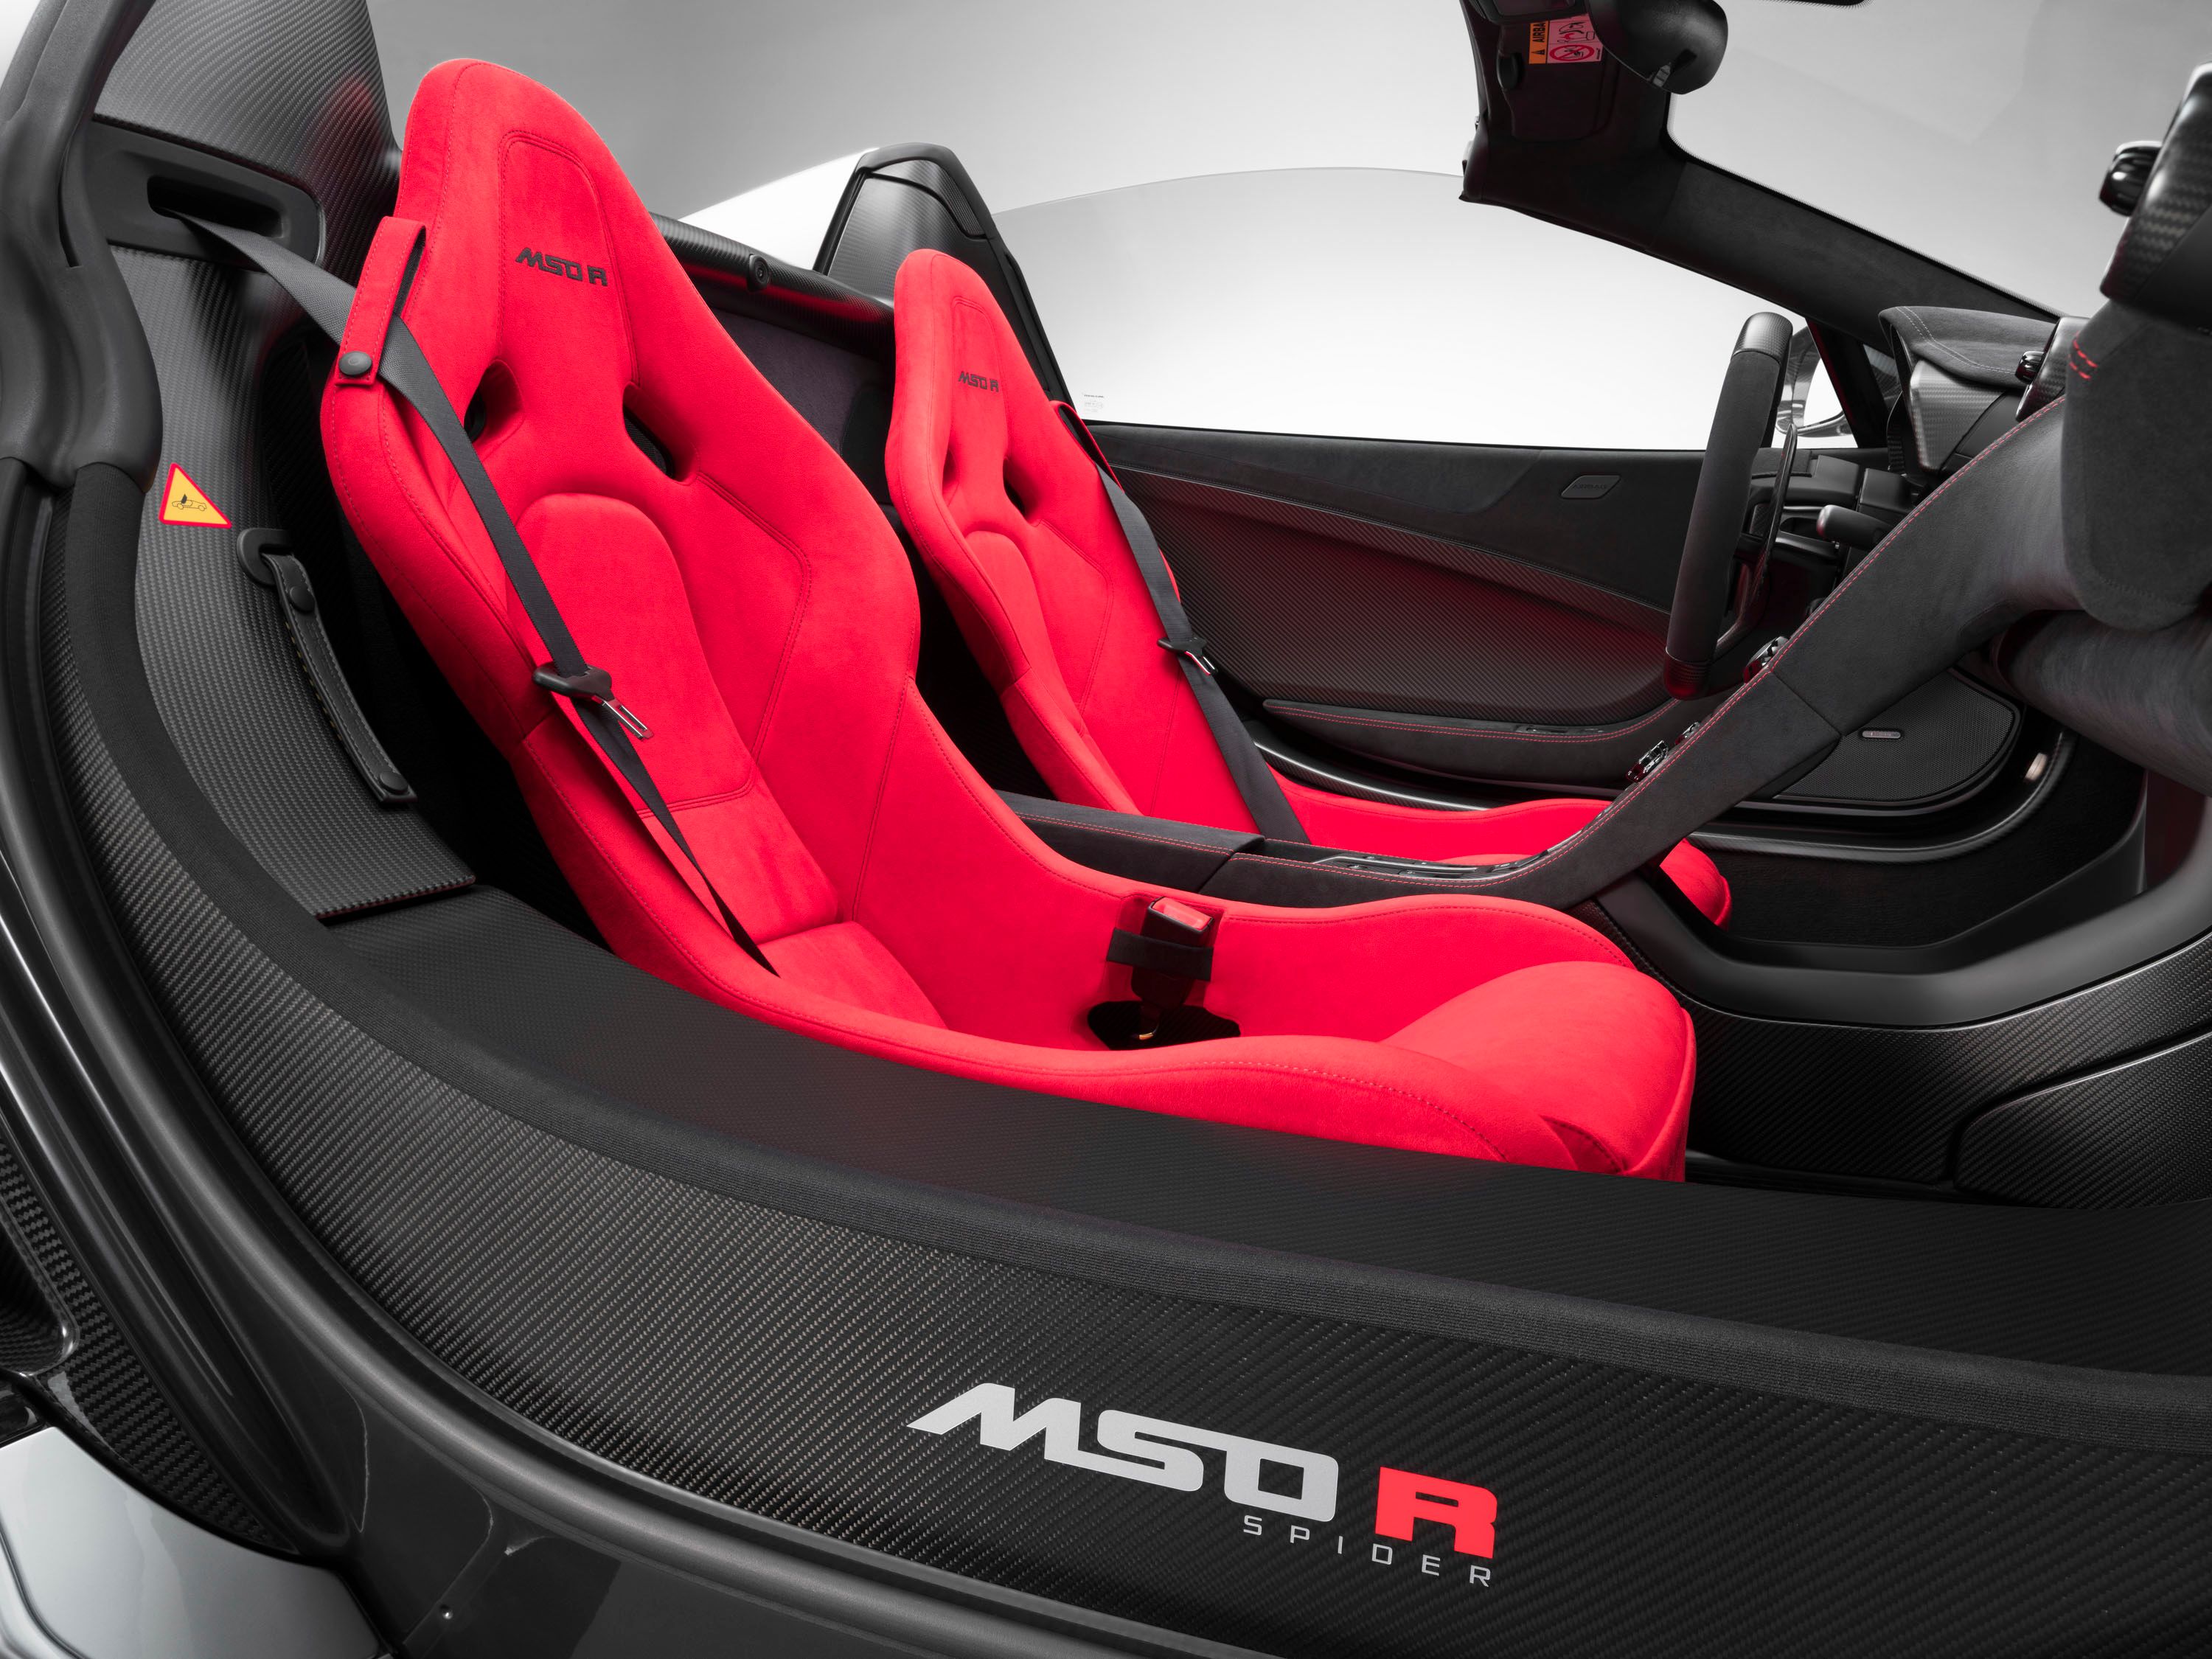 While the seats get red Alcantara with black stitching